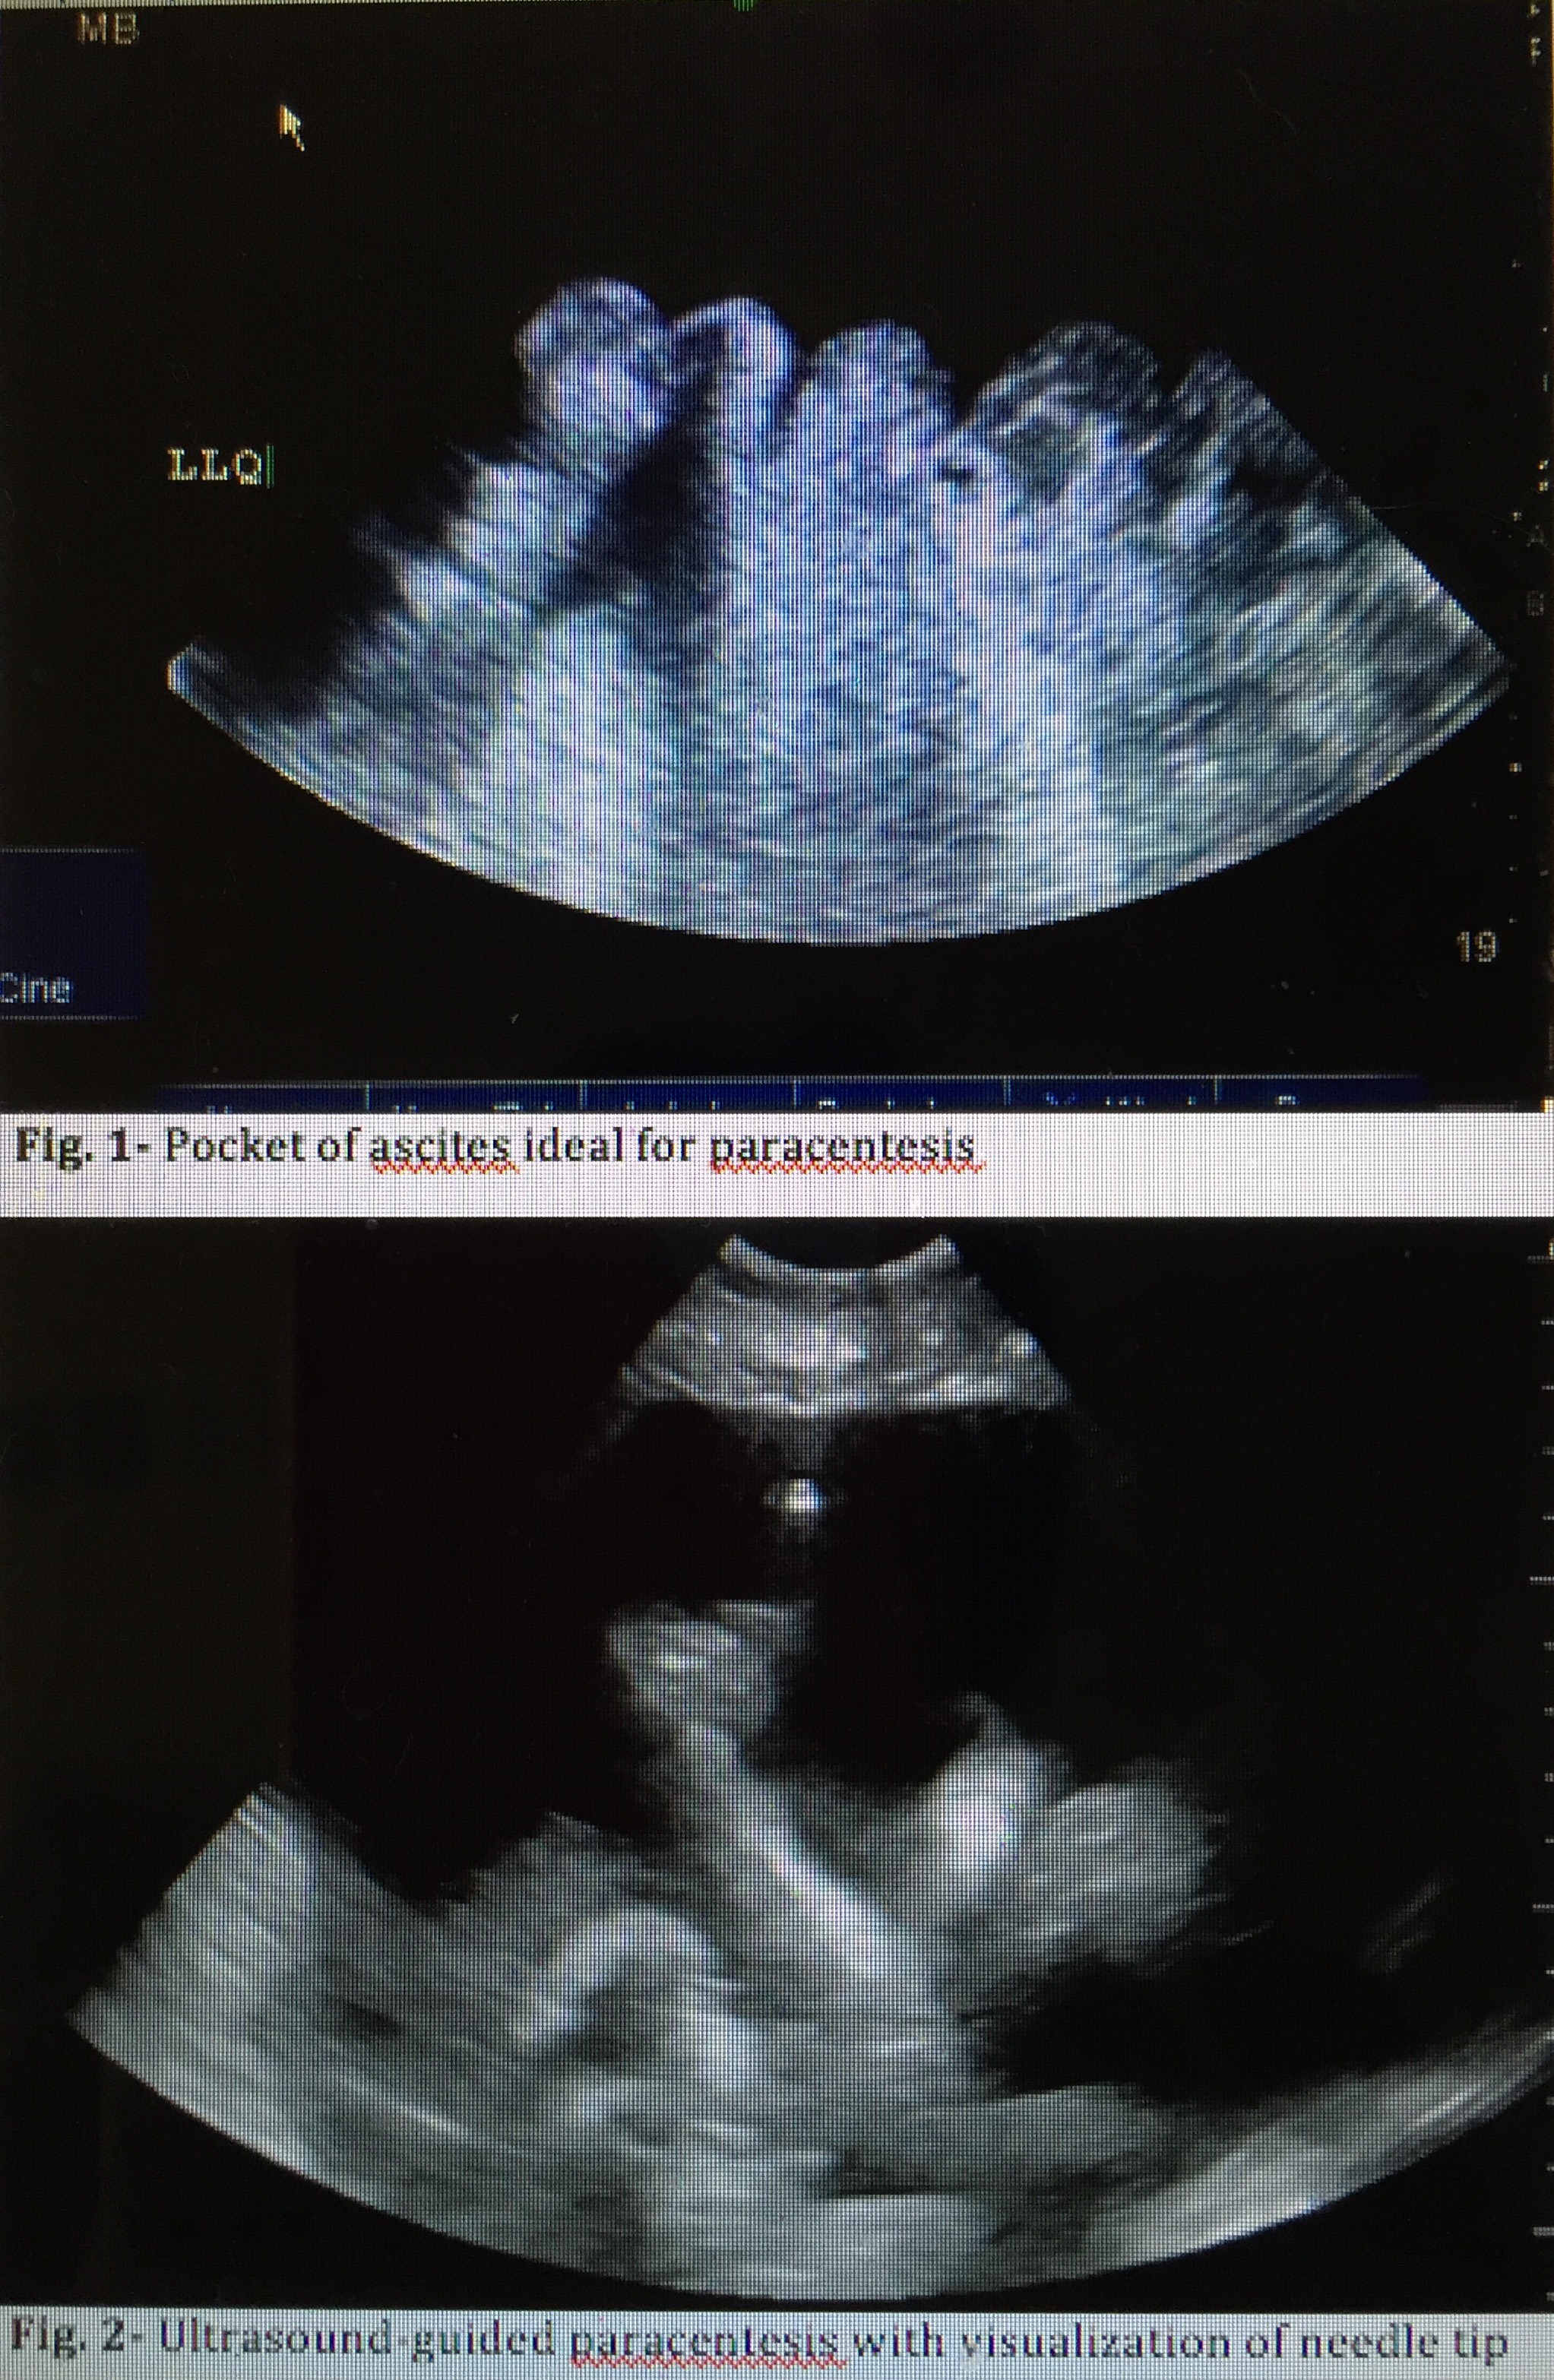 Uses of ultrasound for paracentesis